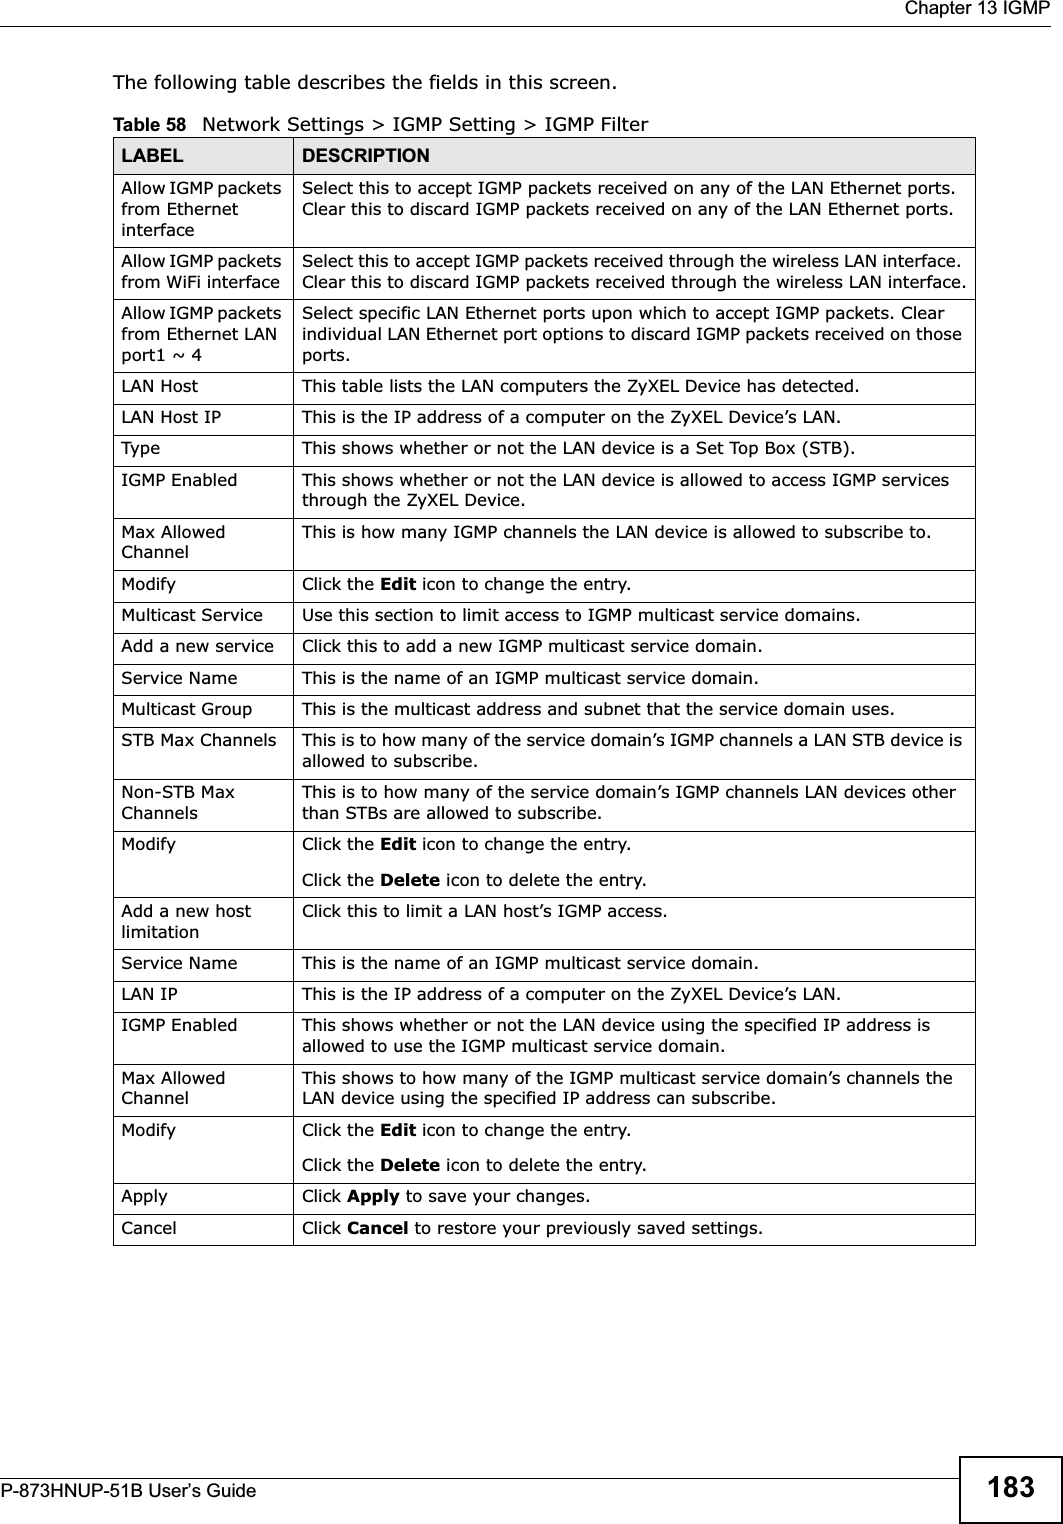  Chapter 13 IGMPP-873HNUP-51B User’s Guide 183The following table describes the fields in this screen.Table 58   Network Settings &gt; IGMP Setting &gt; IGMP Filter LABEL DESCRIPTIONAllow IGMP packets from Ethernet interfaceSelect this to accept IGMP packets received on any of the LAN Ethernet ports. Clear this to discard IGMP packets received on any of the LAN Ethernet ports.Allow IGMP packets from WiFi interface Select this to accept IGMP packets received through the wireless LAN interface. Clear this to discard IGMP packets received through the wireless LAN interface.Allow IGMP packets from Ethernet LAN port1 ~ 4Select specific LAN Ethernet ports upon which to accept IGMP packets. Clear individual LAN Ethernet port options to discard IGMP packets received on those ports.LAN Host This table lists the LAN computers the ZyXEL Device has detected.LAN Host IP This is the IP address of a computer on the ZyXEL Device’s LAN.Type This shows whether or not the LAN device is a Set Top Box (STB).IGMP Enabled This shows whether or not the LAN device is allowed to access IGMP services through the ZyXEL Device.Max Allowed ChannelThis is how many IGMP channels the LAN device is allowed to subscribe to.Modify Click the Edit icon to change the entry.Multicast Service Use this section to limit access to IGMP multicast service domains. Add a new service Click this to add a new IGMP multicast service domain. Service Name This is the name of an IGMP multicast service domain.Multicast Group This is the multicast address and subnet that the service domain uses.STB Max Channels This is to how many of the service domain’s IGMP channels a LAN STB device is allowed to subscribe.Non-STB Max ChannelsThis is to how many of the service domain’s IGMP channels LAN devices other than STBs are allowed to subscribe.Modify Click the Edit icon to change the entry.Click the Delete icon to delete the entry.Add a new host limitationClick this to limit a LAN host’s IGMP access.Service Name This is the name of an IGMP multicast service domain.LAN IP This is the IP address of a computer on the ZyXEL Device’s LAN.IGMP Enabled This shows whether or not the LAN device using the specified IP address is allowed to use the IGMP multicast service domain.Max Allowed ChannelThis shows to how many of the IGMP multicast service domain’s channels the LAN device using the specified IP address can subscribe.Modify Click the Edit icon to change the entry.Click the Delete icon to delete the entry.Apply Click Apply to save your changes.Cancel Click Cancel to restore your previously saved settings.